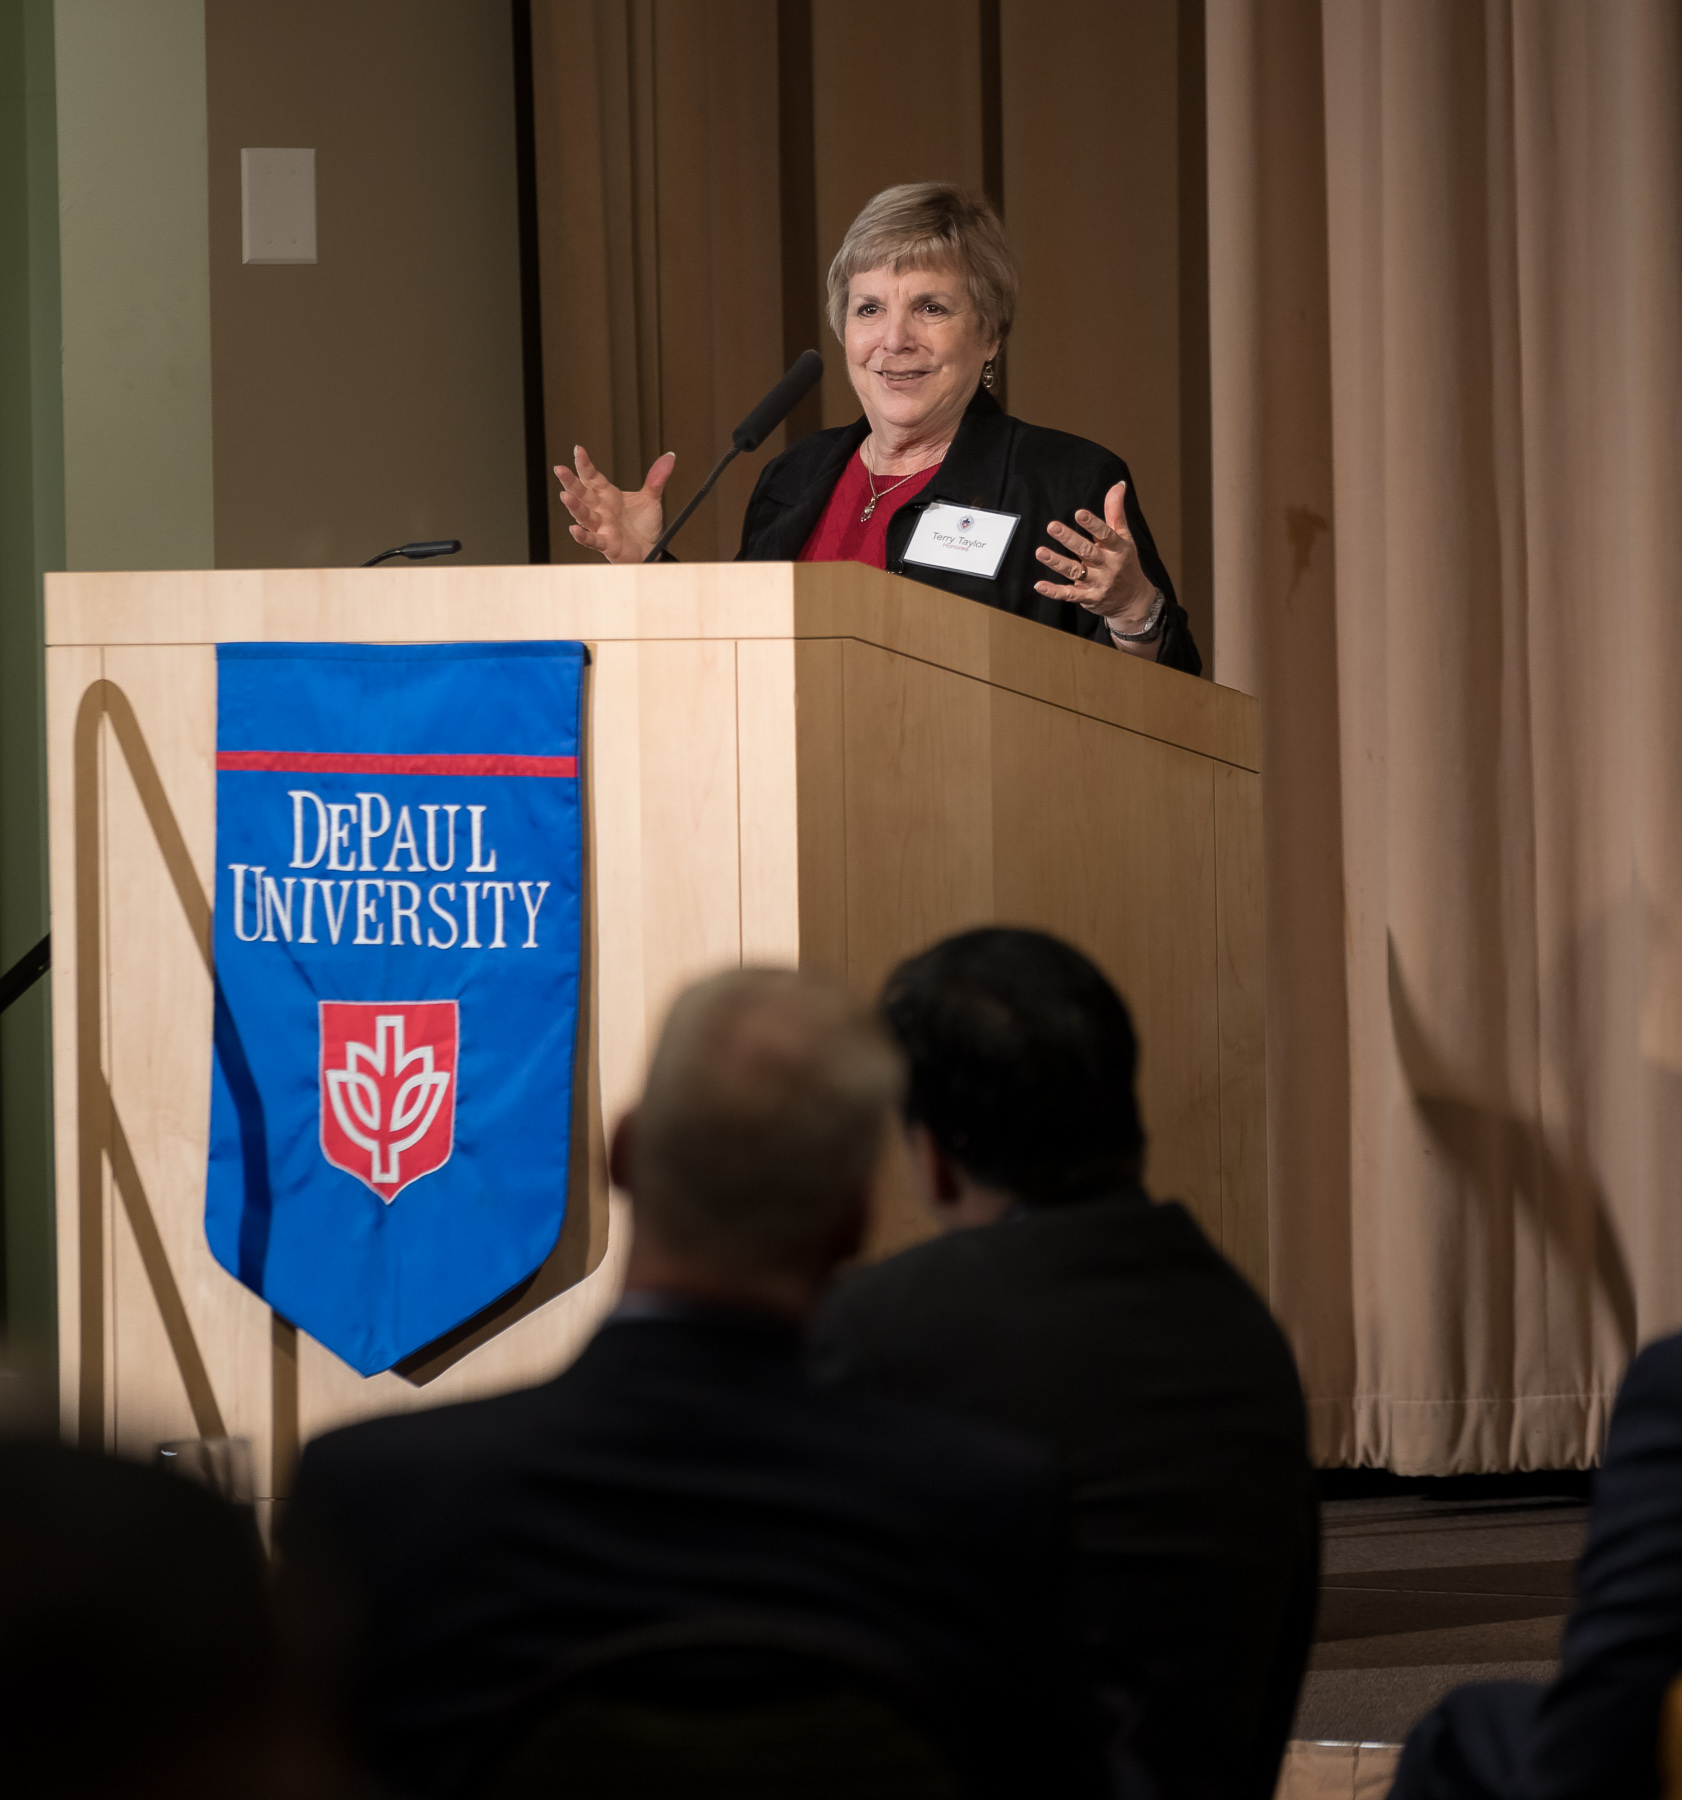 Terry Taylor, associate university librarian for Teaching, Learning and Research, offers her reflections on the past 25 years as DePaul University faculty and staff members are honored for their 25 years of service during a luncheon, Tuesday, Nov. 13, 2018, at the Lincoln Park Student Center. The honorees will have their names added to plaques located on the Loop and Lincoln Park Campuses. (DePaul University/Jeff Carrion)